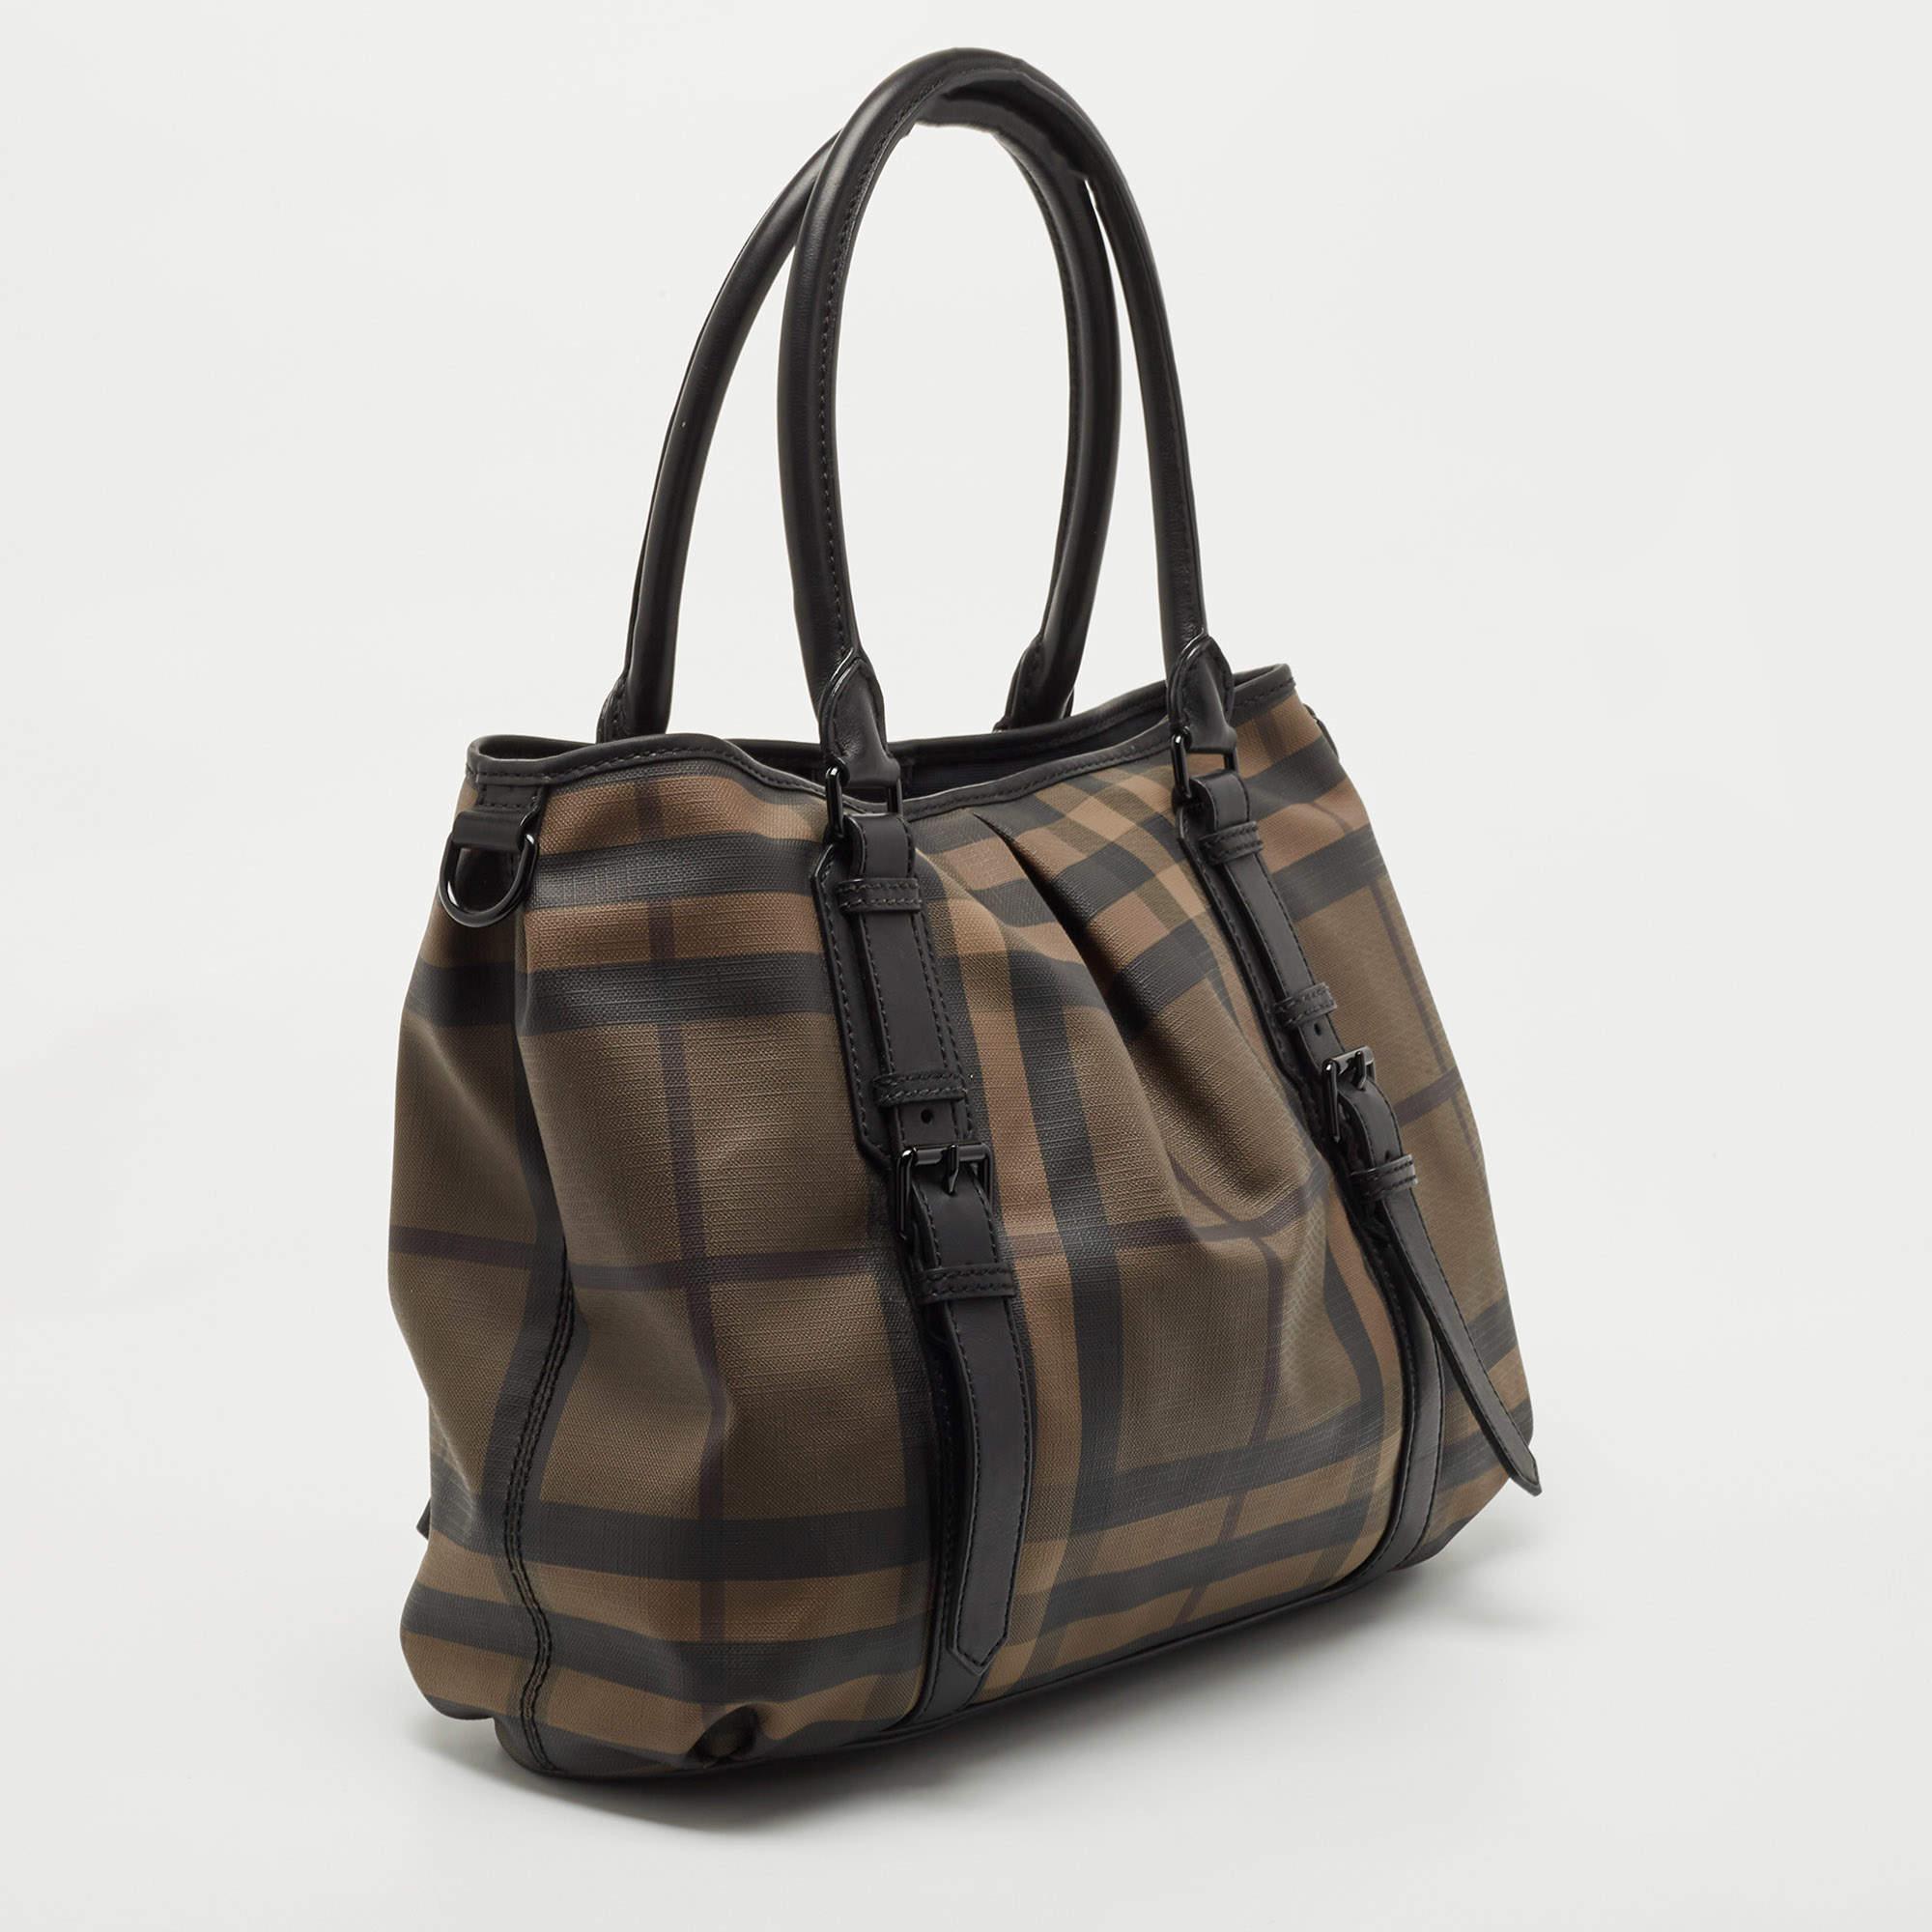 Burberry's Lowry tote deserves to be in every fashionista's bag collection! Meticulously crafted from PVC and leather the bag features a lovely cartridge pleat exterior. The bag is equipped with a detachable shoulder strap, protective metal feet at